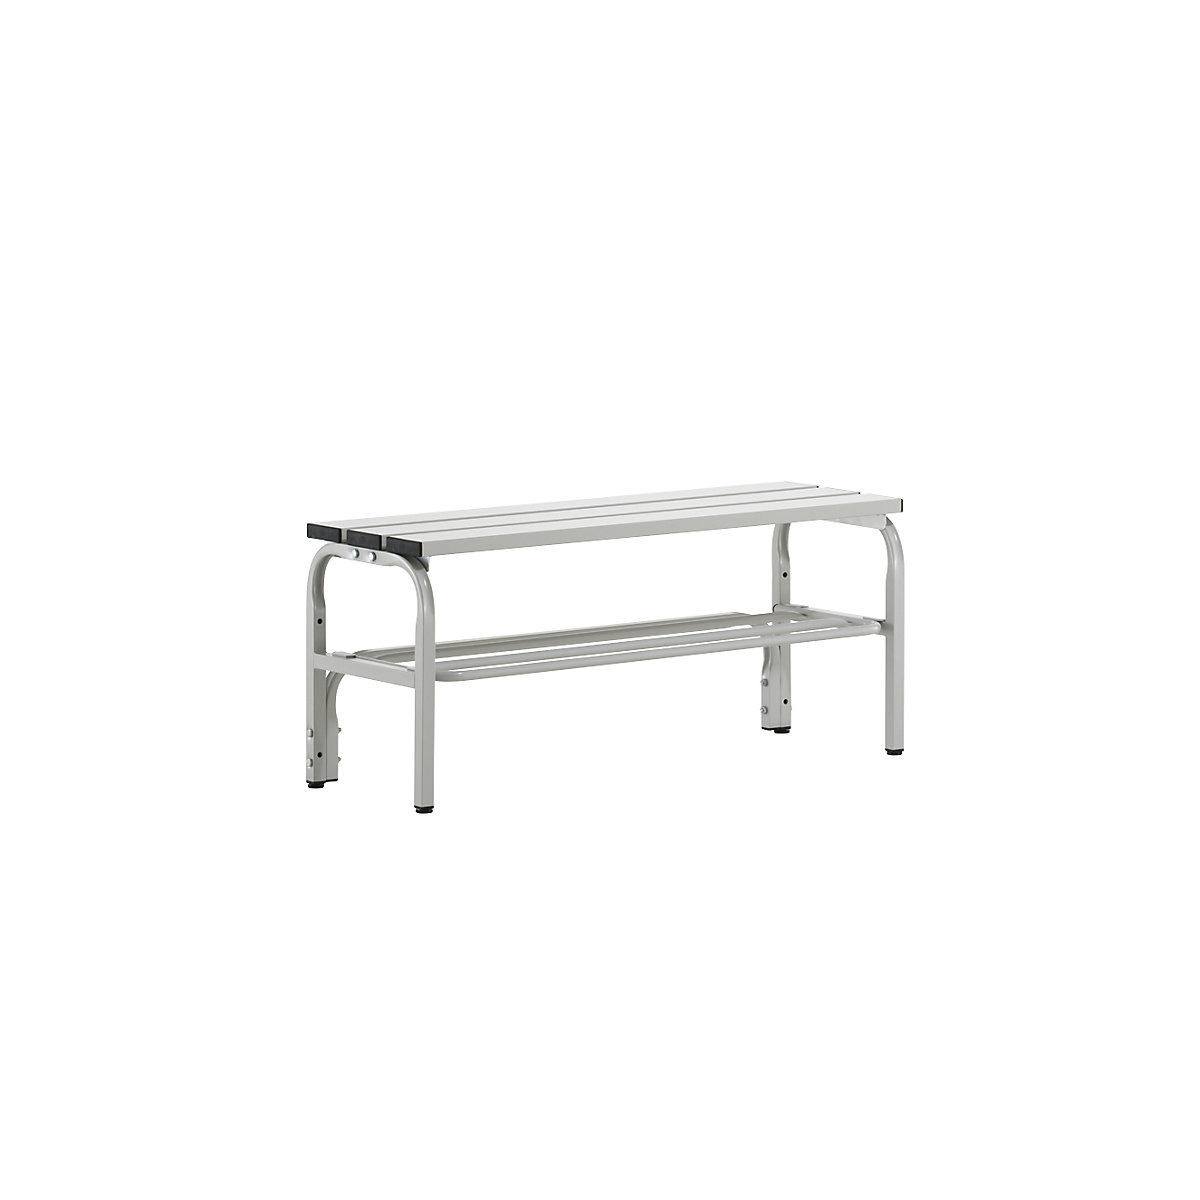 Sypro – Changing room bench made of stainless steel, HxD 450 x 350 mm, length 1015 mm, light grey, shoe rack